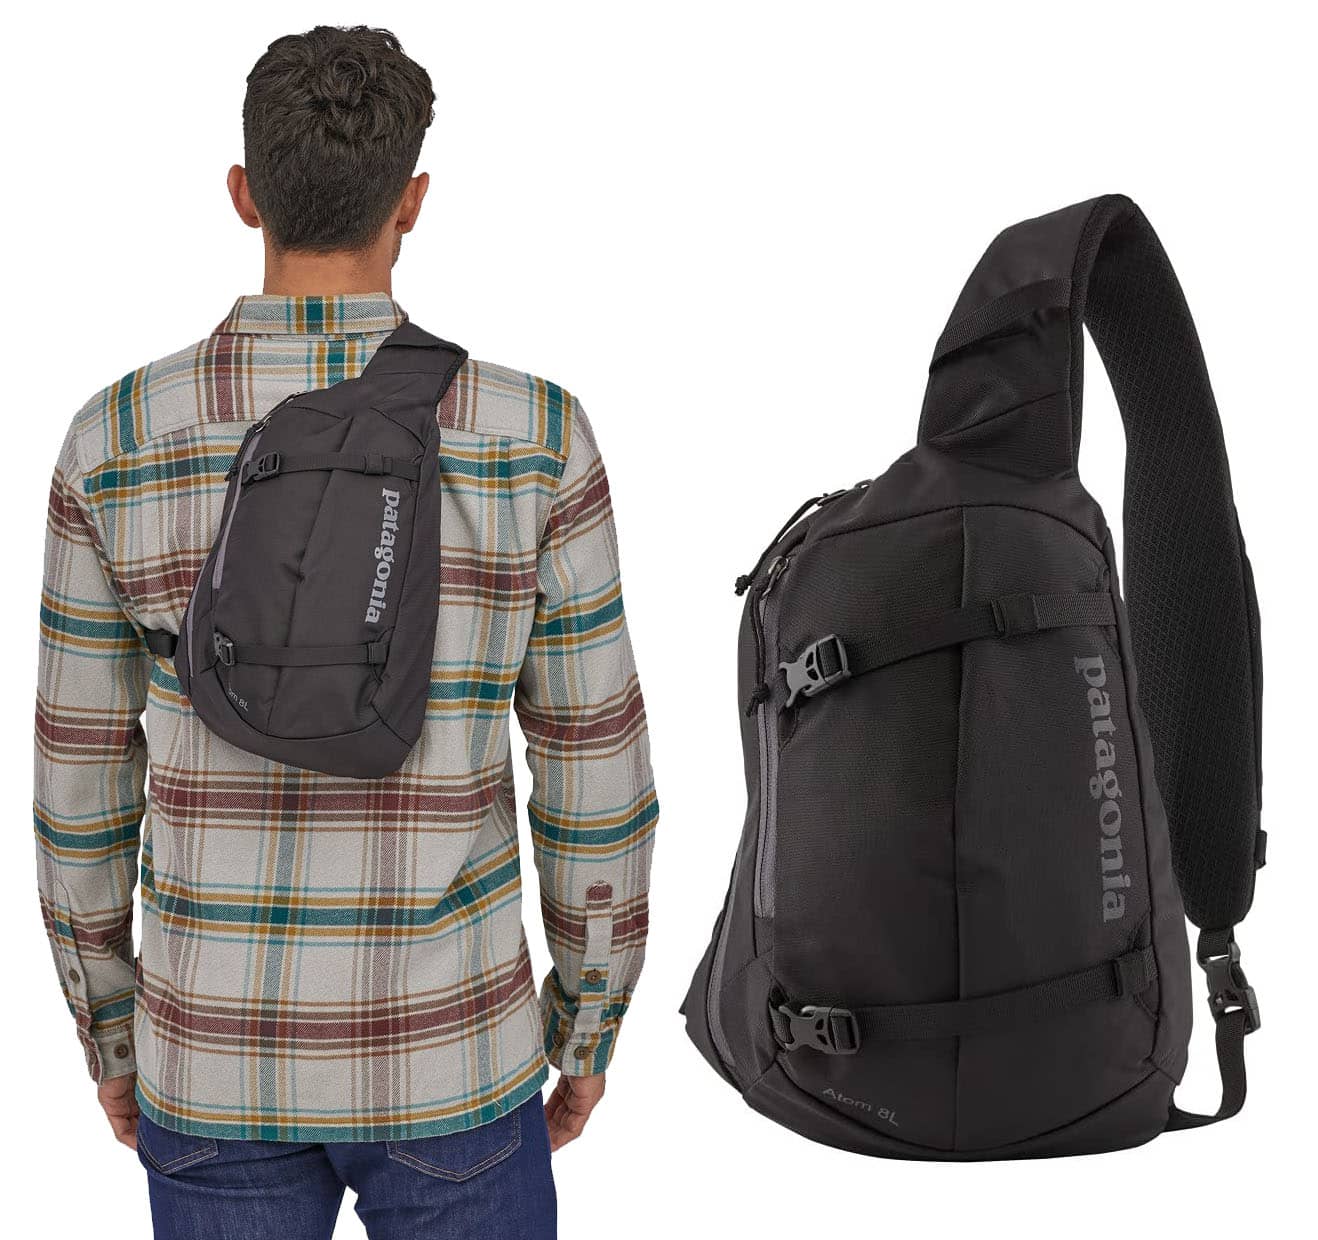 Durable and sustainable, Patagonia's Atom Sling 8L features a classic sling design with multiple pockets and a spacious interior, perfect for any outdoor activities